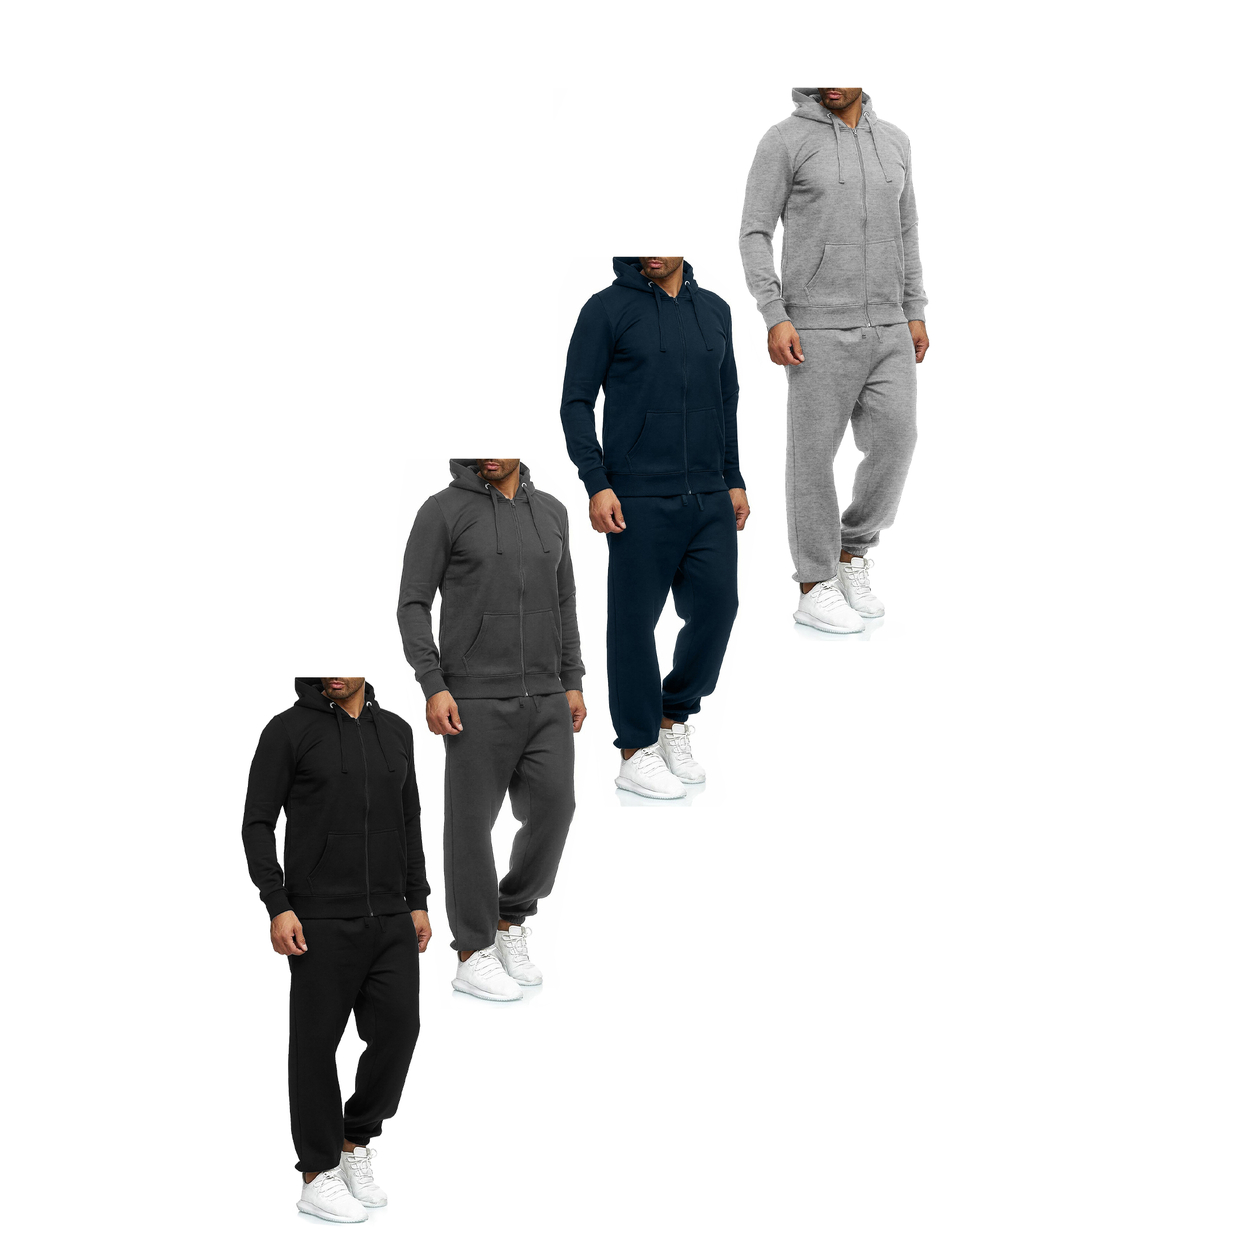 Multi-Pack: Men's Casual Big & Tall Athletic Active Winter Warm Fleece Lined Full Zip Tracksuit Jogger Set - Grey, 1-pack, Medium